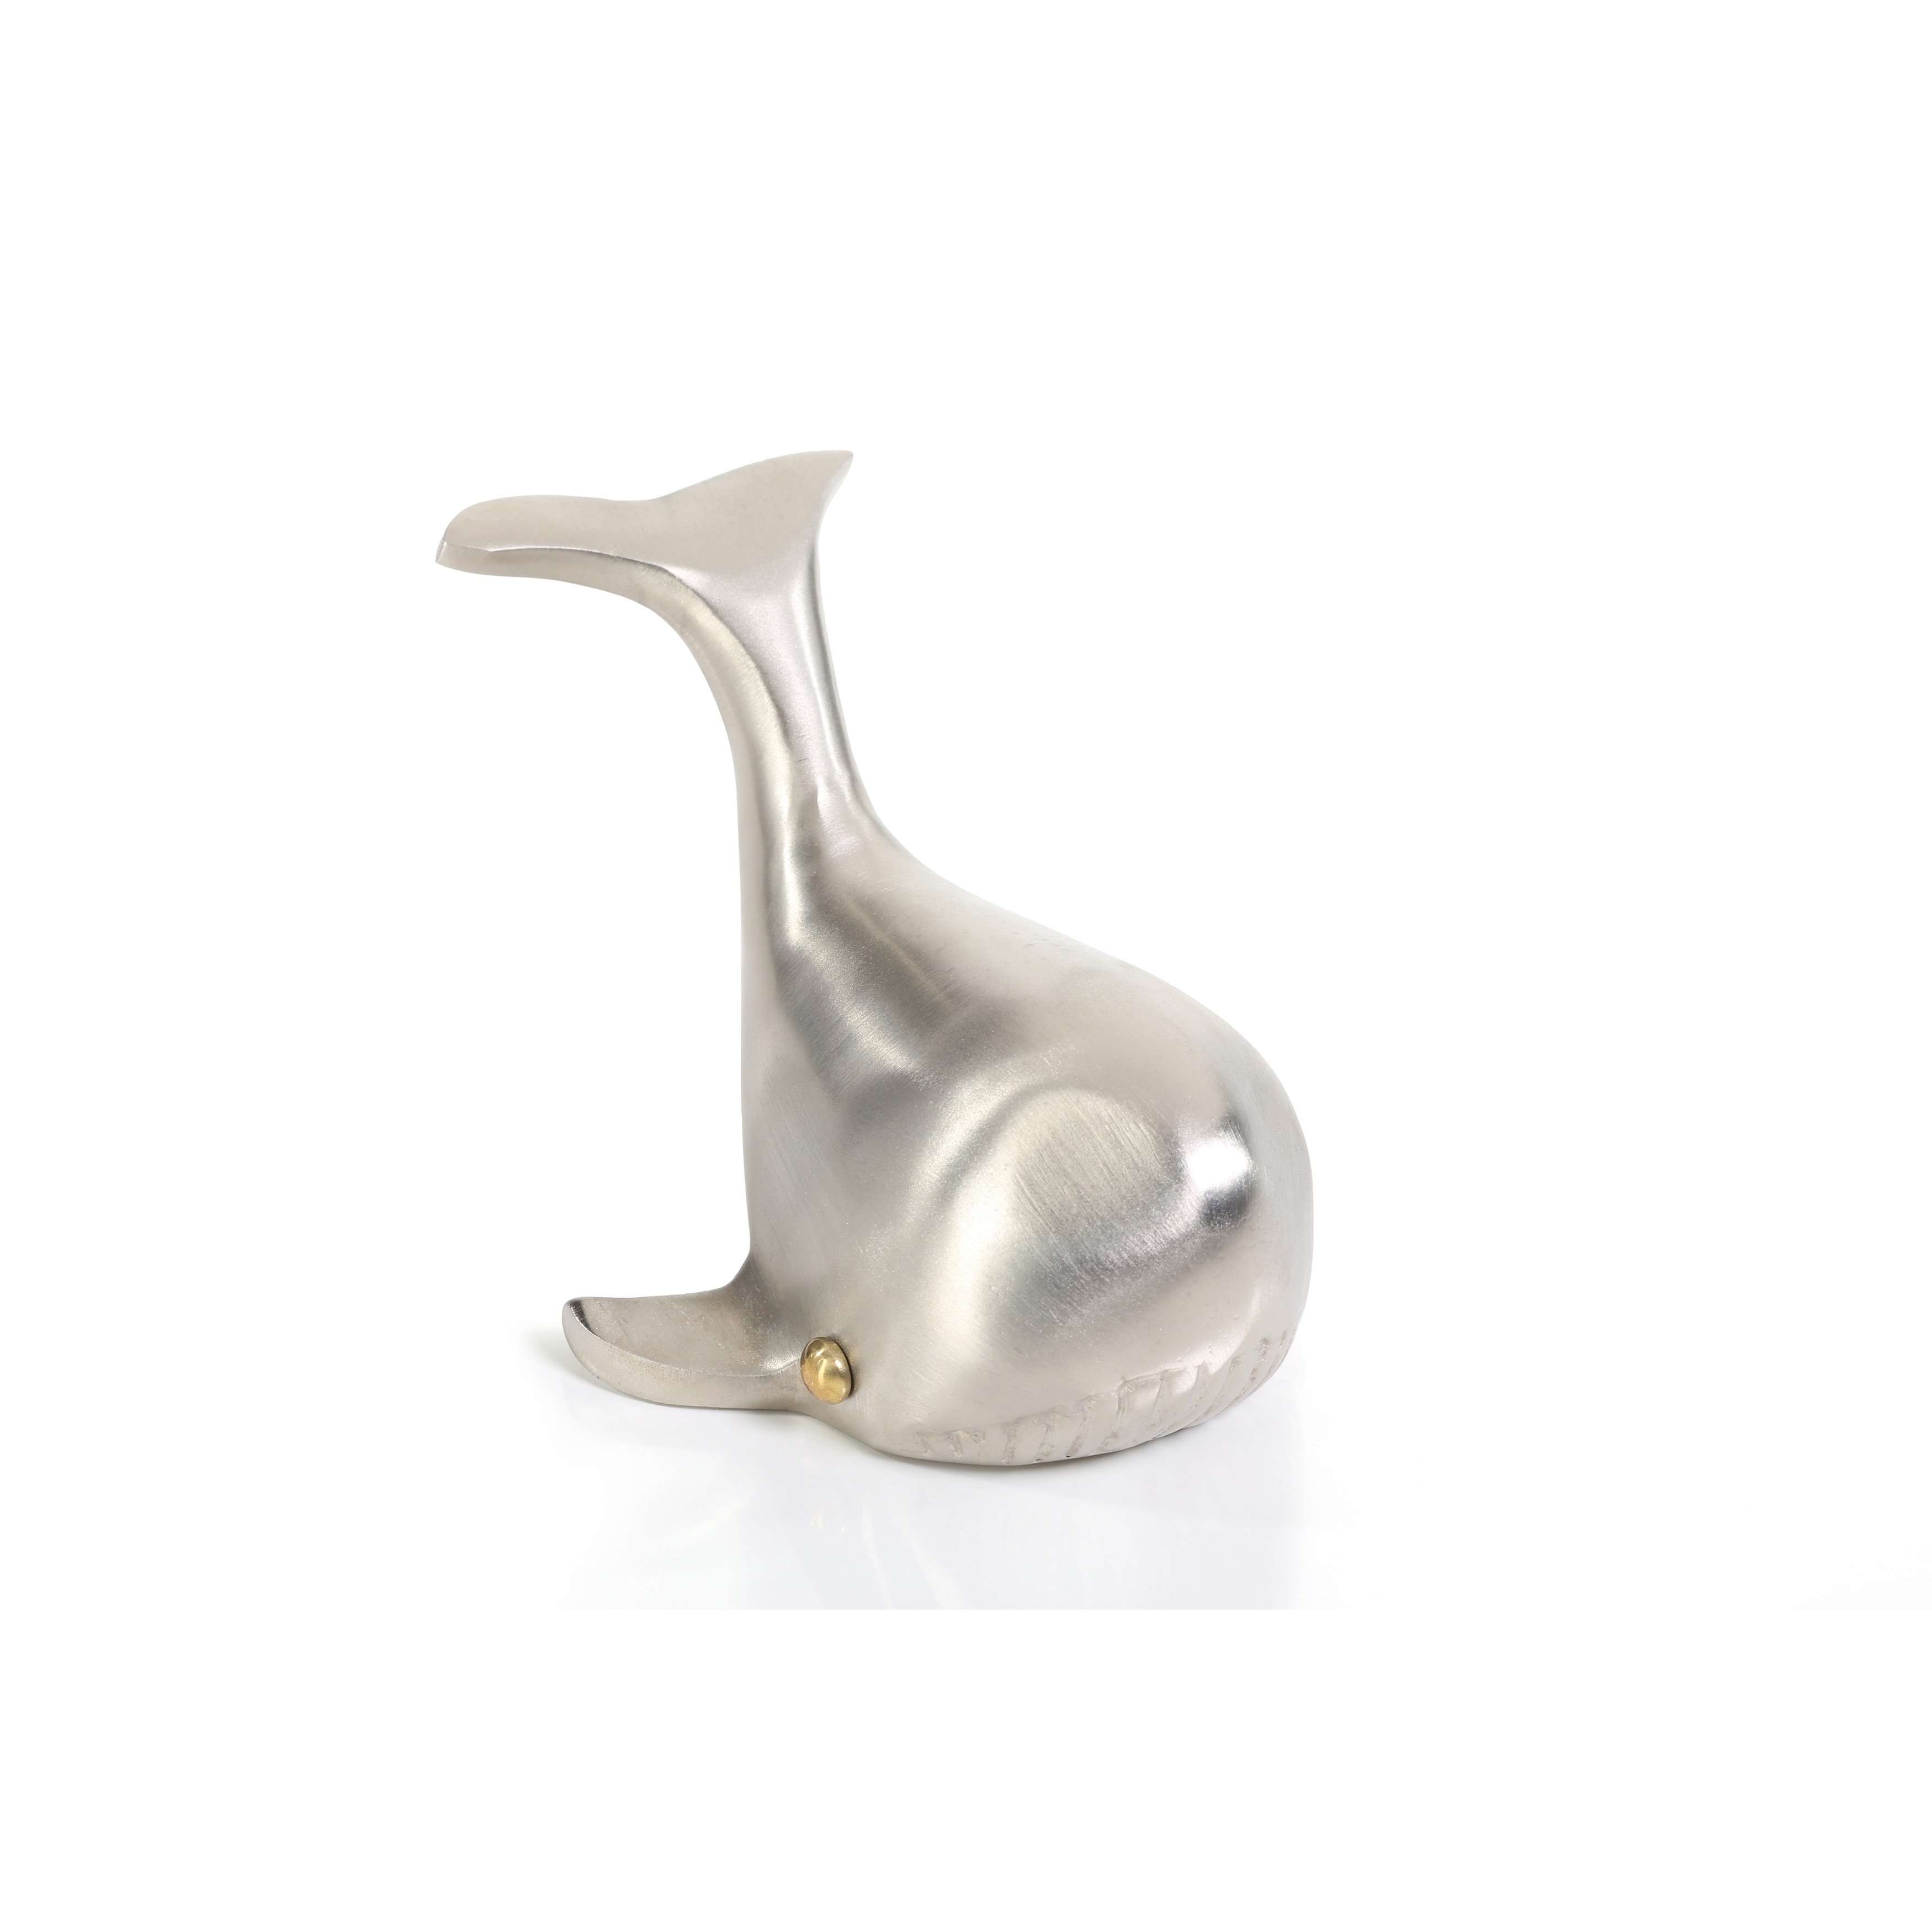 https://ak1.ostkcdn.com/images/products/20710668/Orca-Whale-Bottle-Opener-Pewter-Set-of-2-14958185-7d13-43b7-85bb-c50072e9bc54.jpg